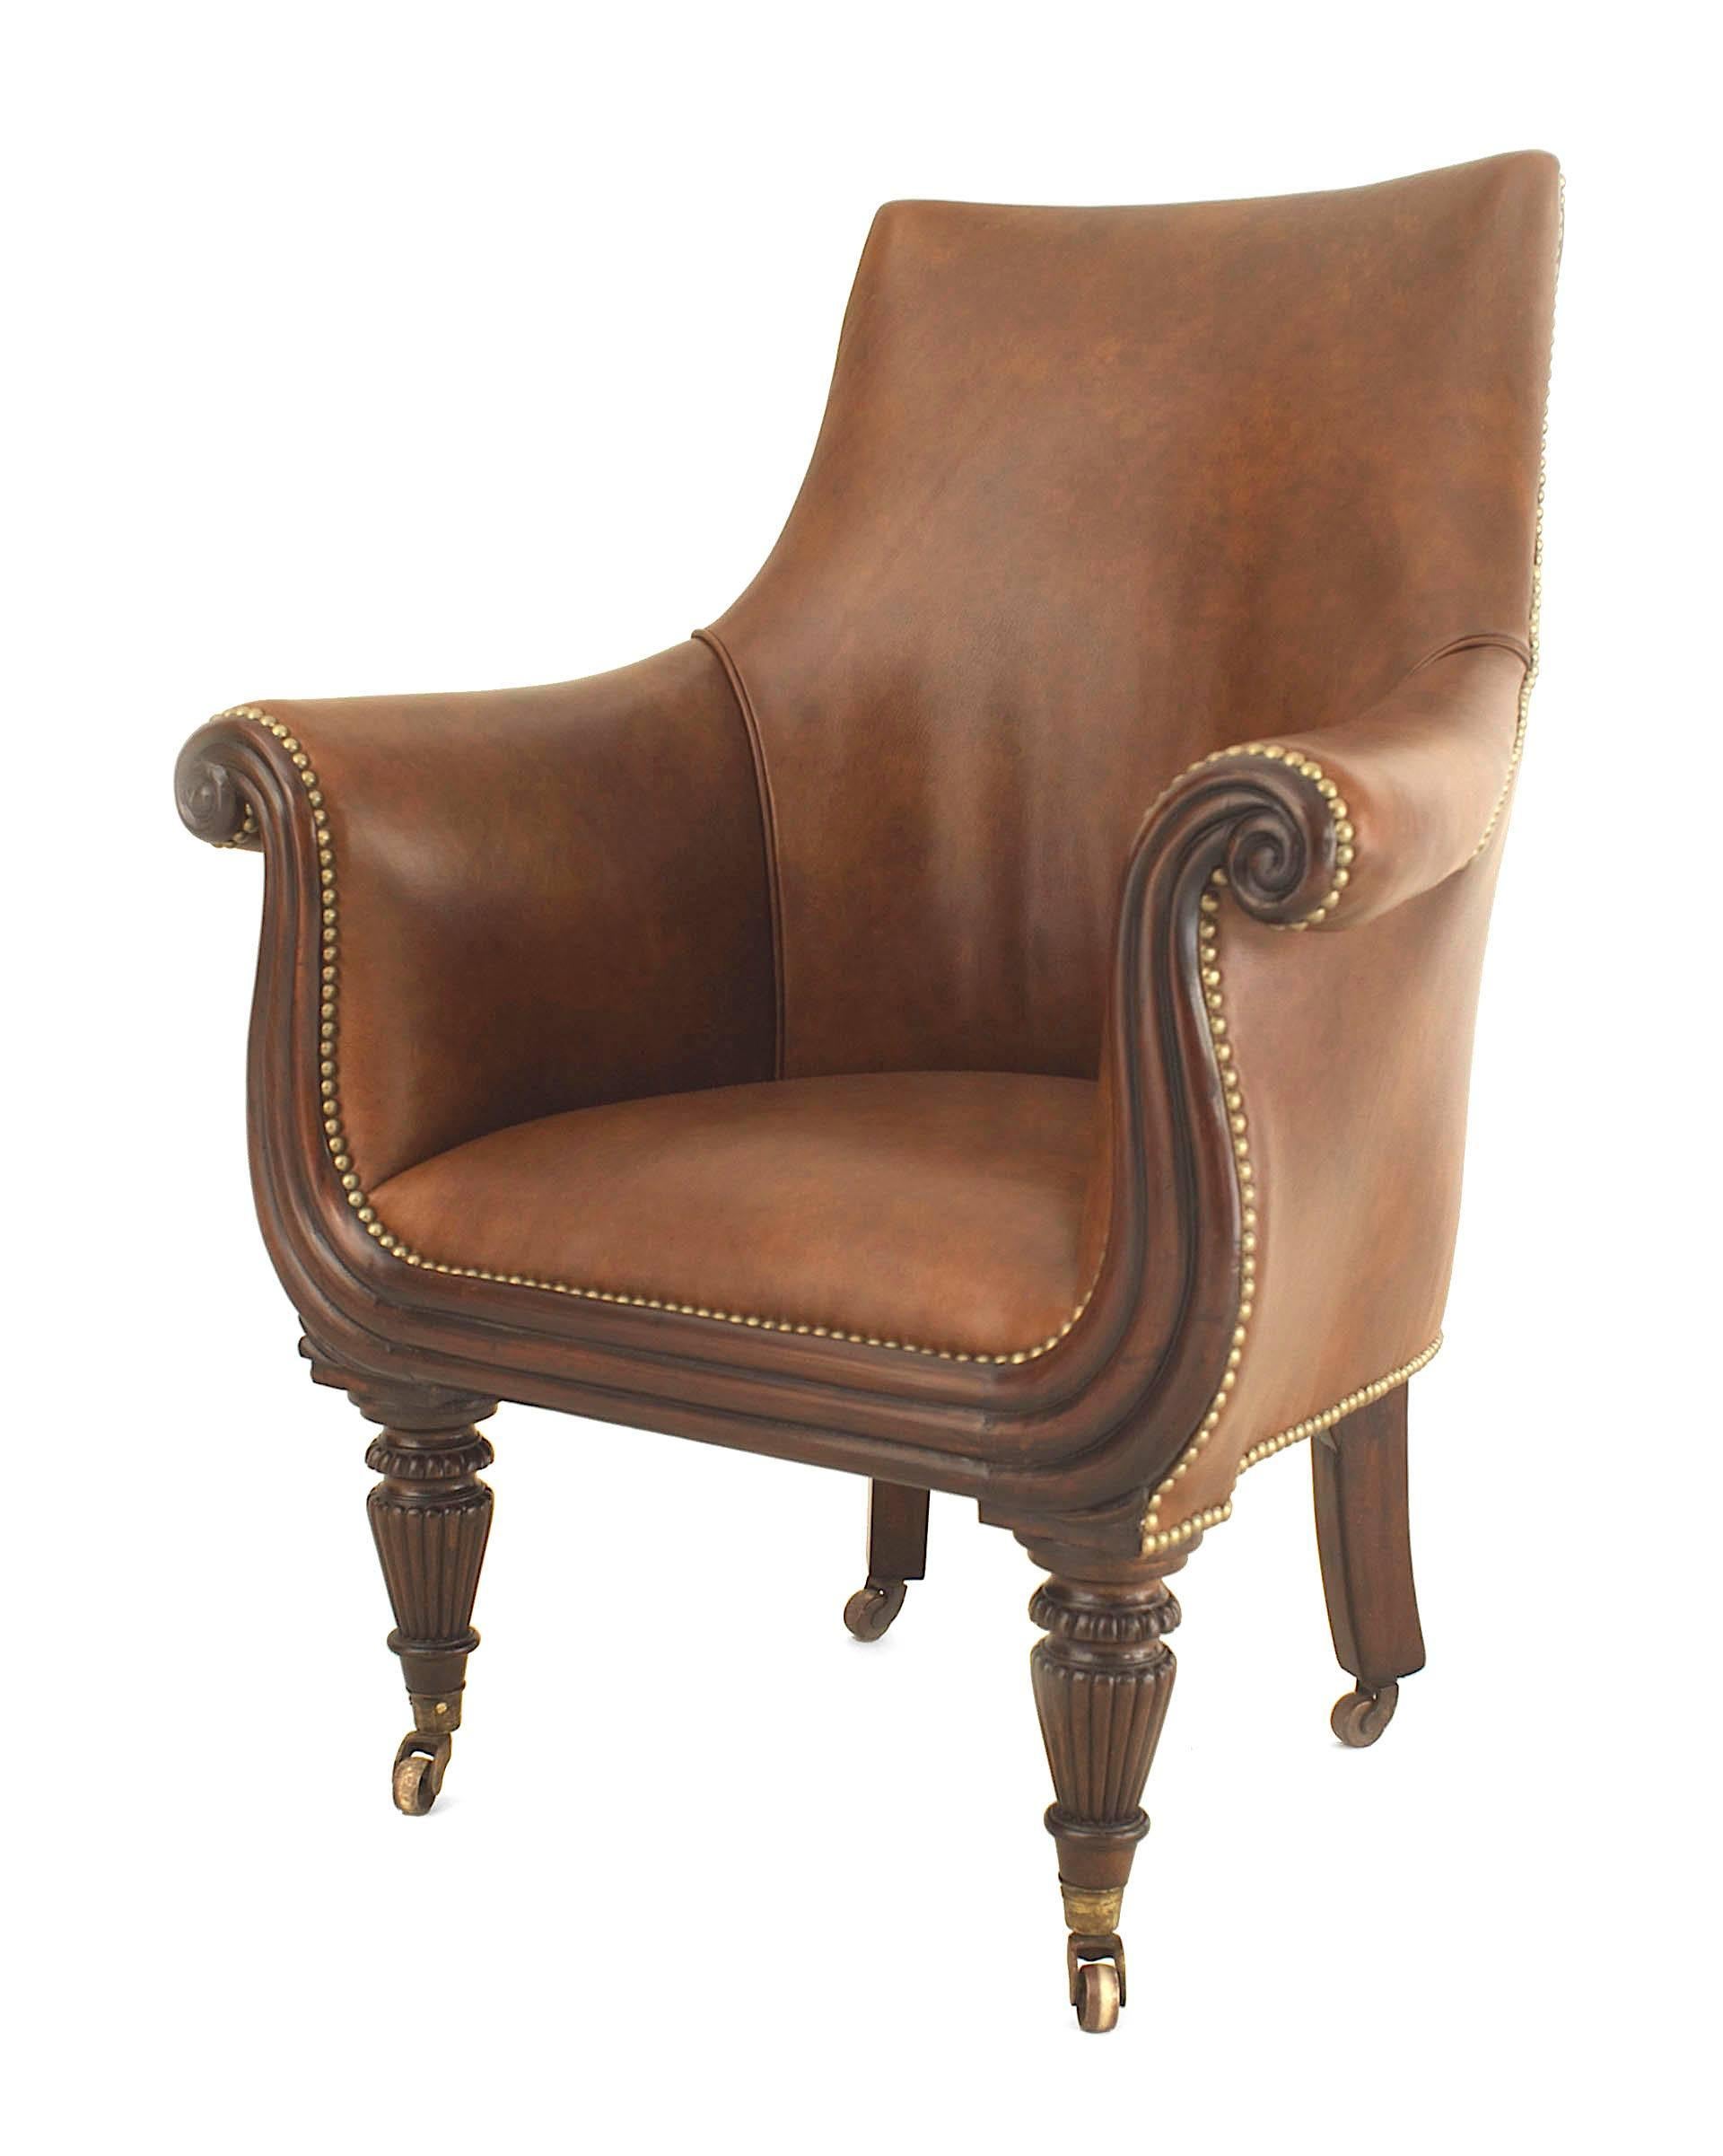 English Regency mahogany tub form library style arm chair with a brown leather upholstered seat and back having brass nail head trim.
